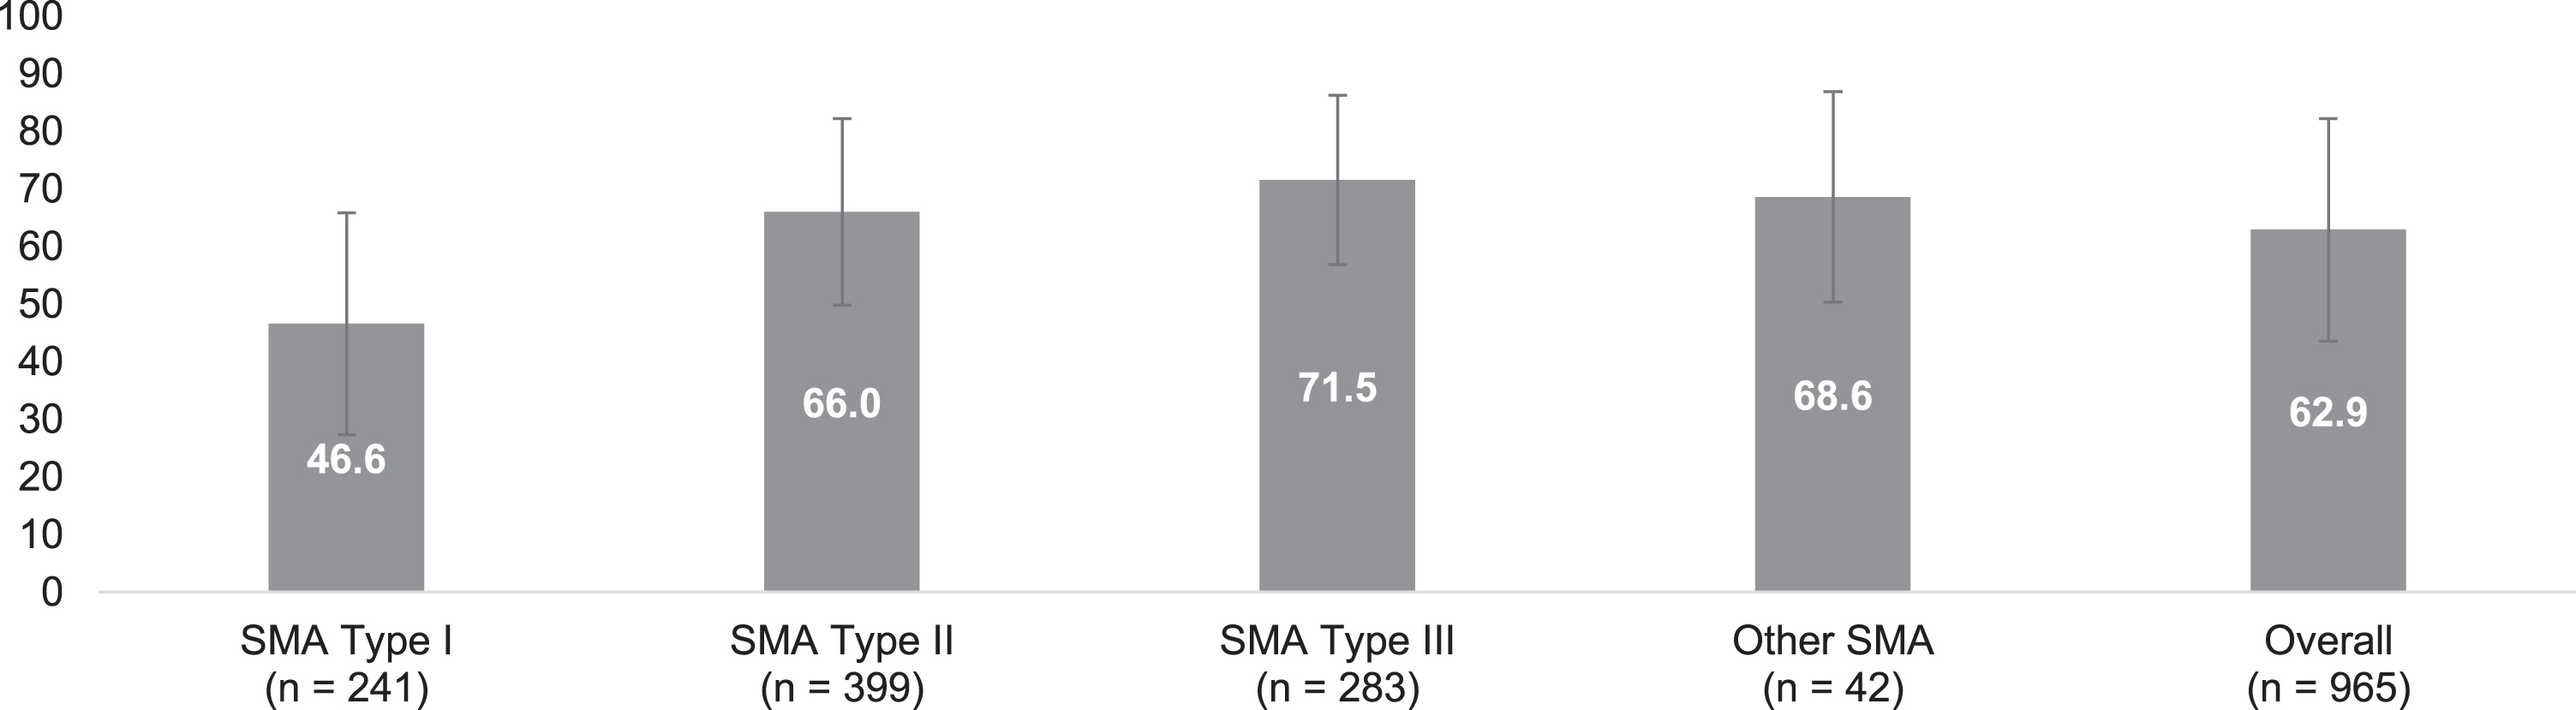 EQ-5D-5L Visual Analogue Scale: Overall and by self-reported SMA type. Legend: EQ-5D-5L visual analogue scale assesses (y-axis) the perceived health of the individual with SMA (or their adult proxy) from 0 (worst imaginable health) to 100 (the best imaginable health). Scores are reported for each self-reported SMA type with error bars representing one standard deviation from the mean. SMA = spinal muscular atrophy.